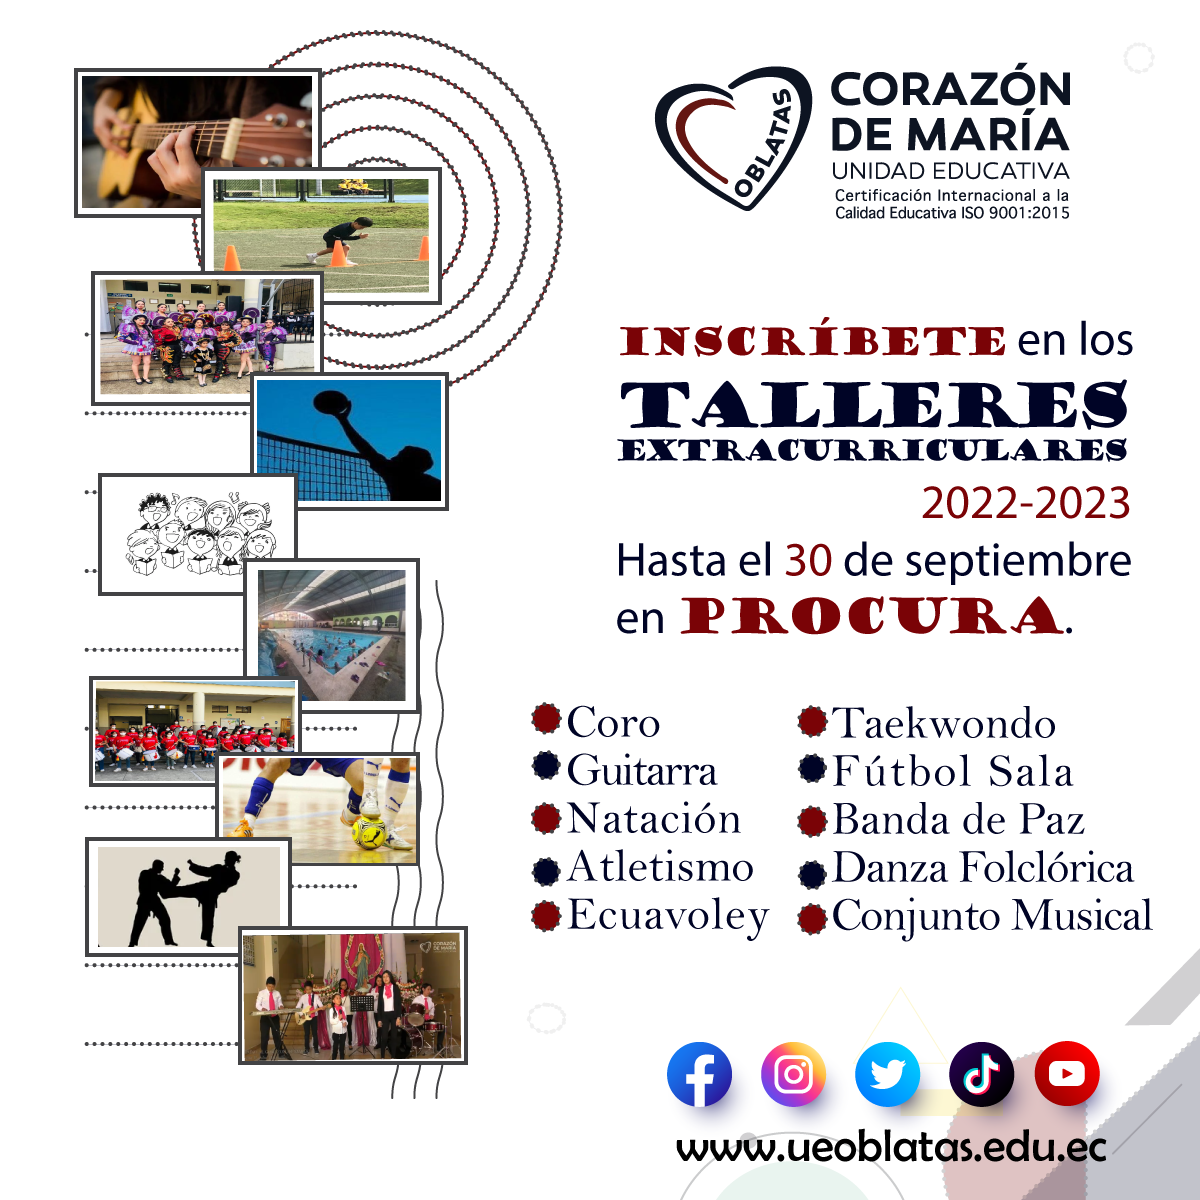 Talleres Extracurriculares 2022-2023